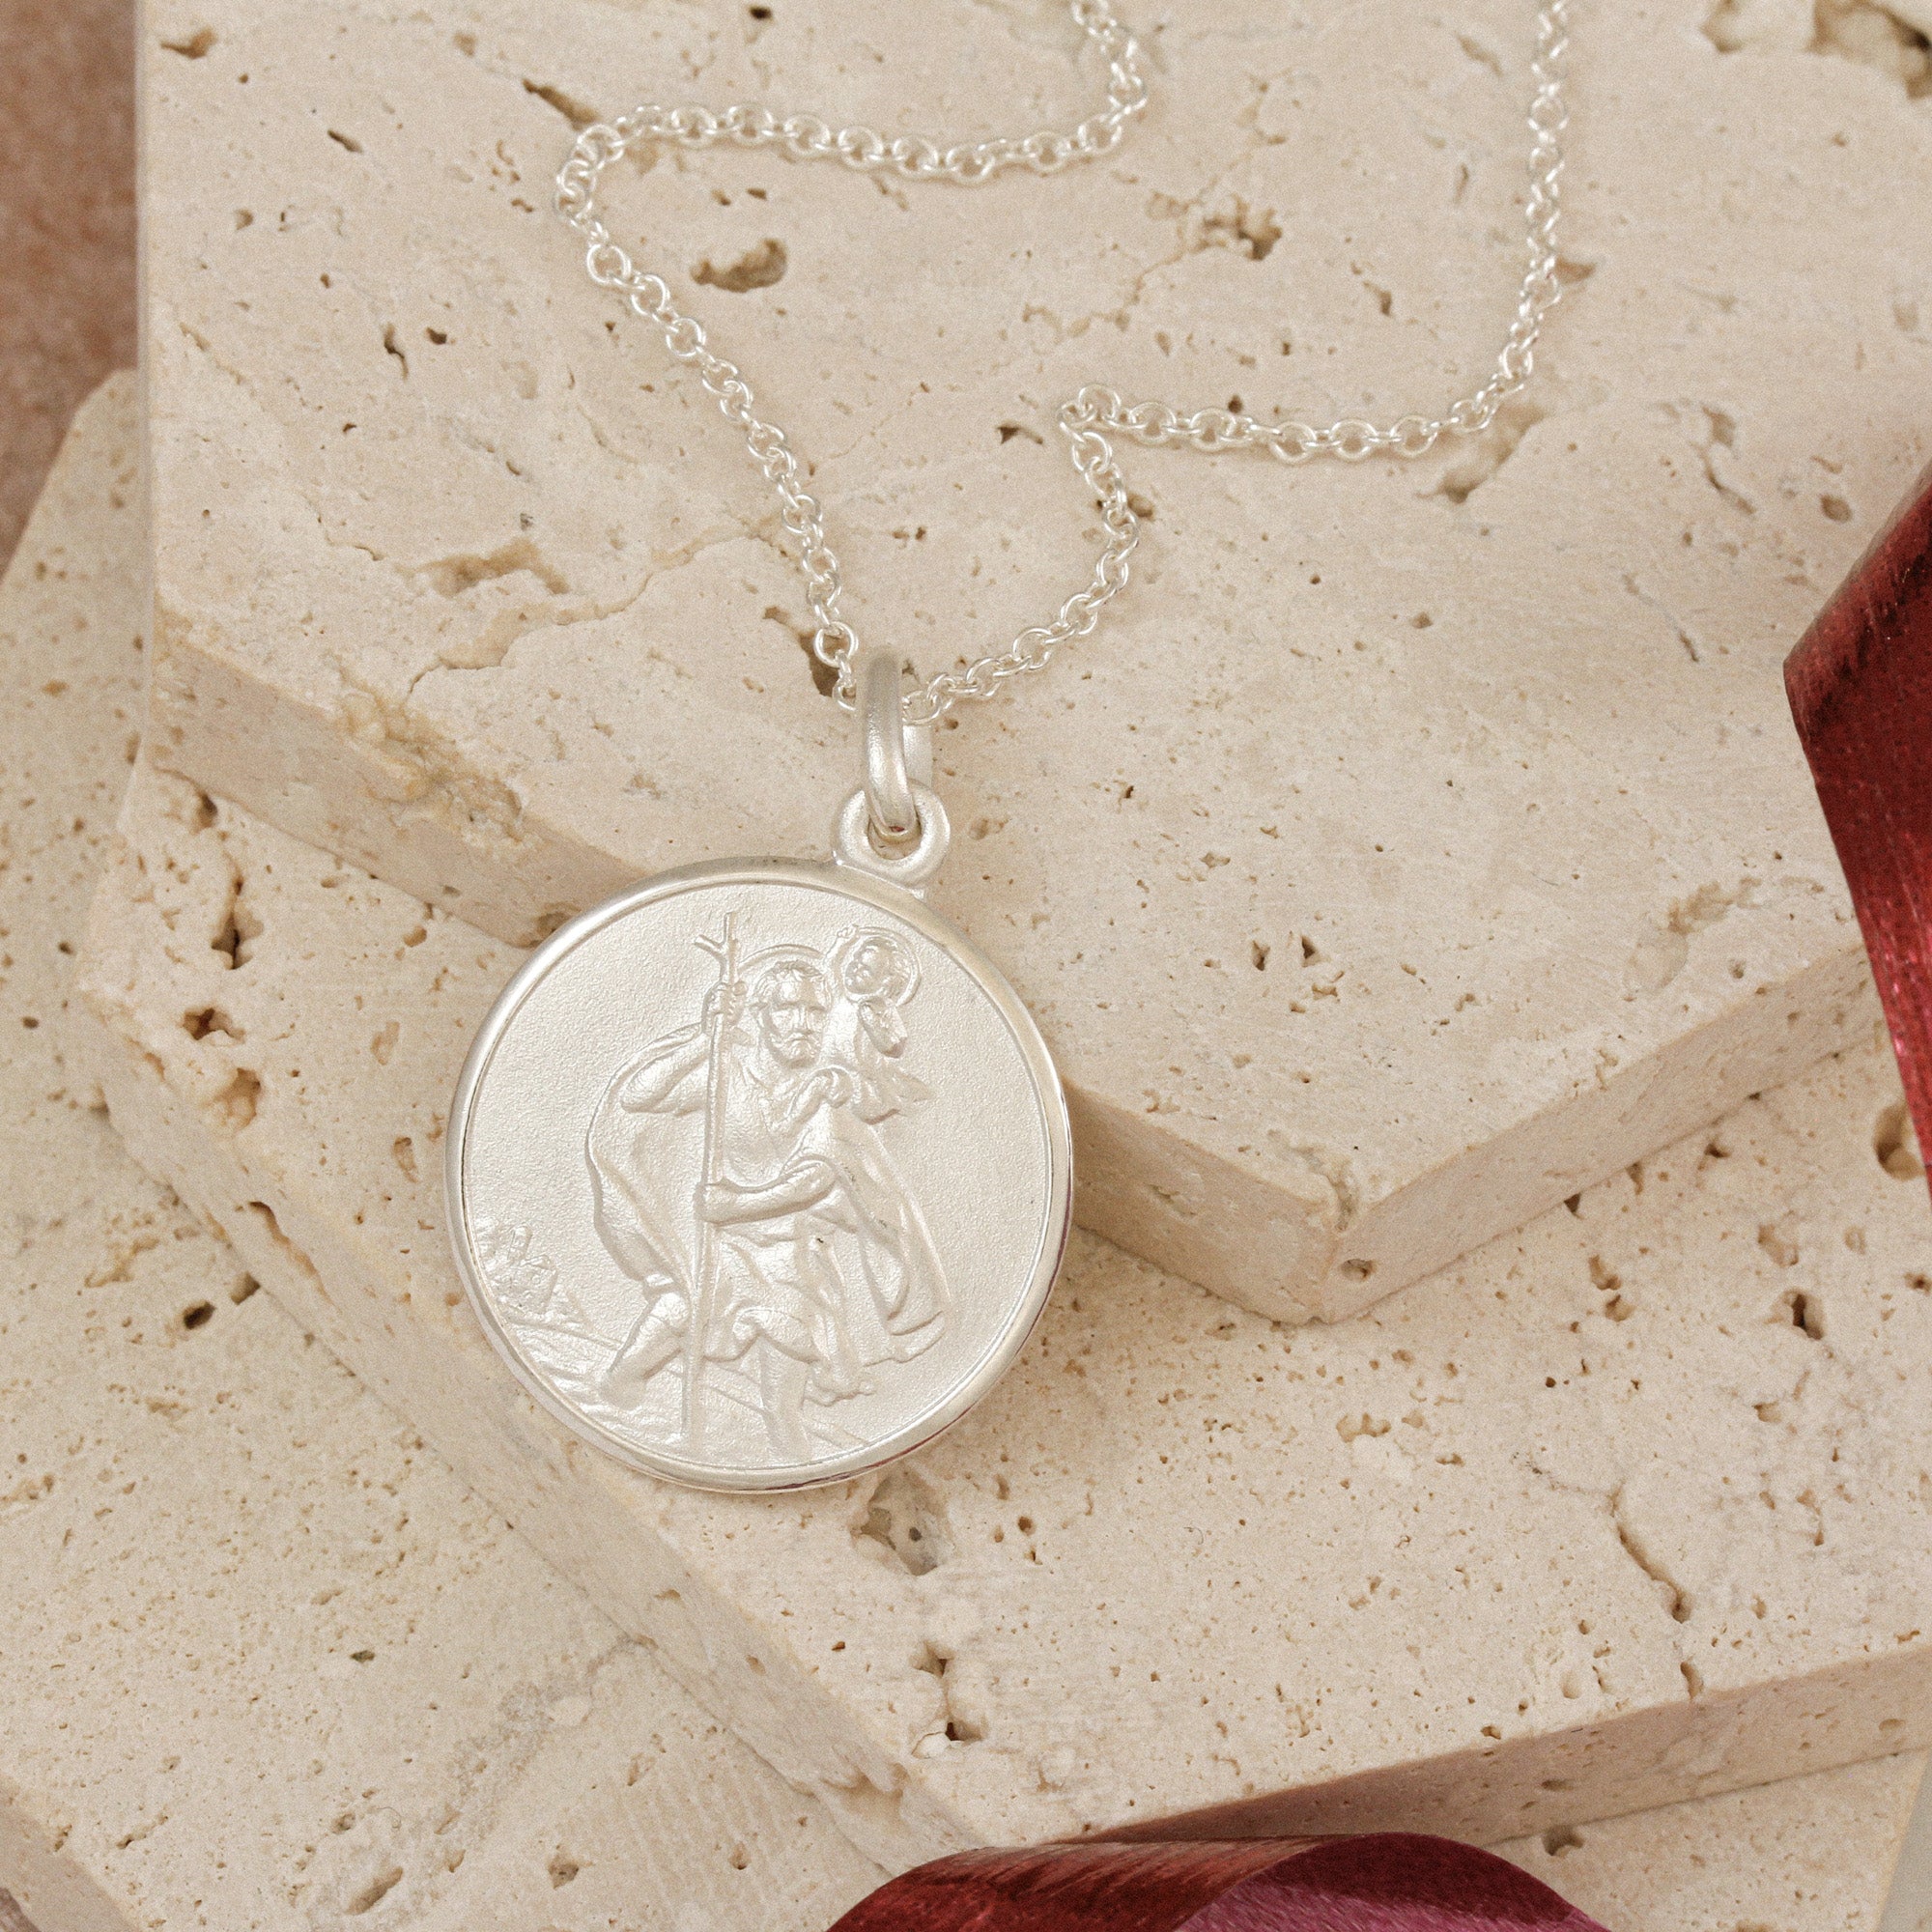 large 24mm wide silver classic saint christopher necklace on heavier curb chain